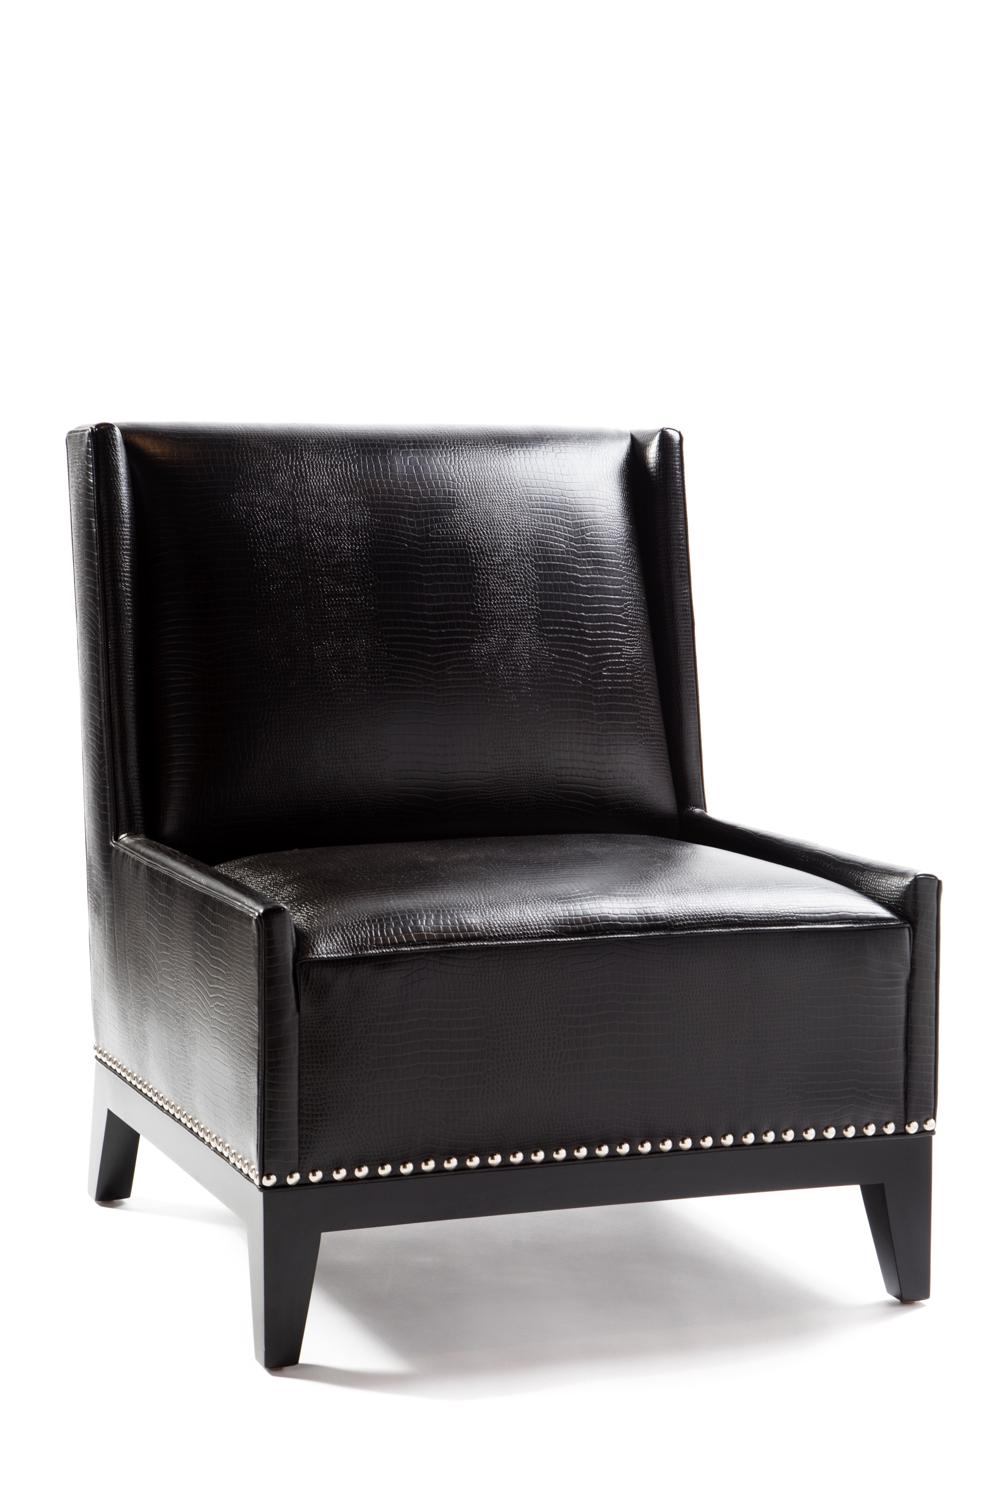 Hand-Crafted Contemporary Roma Chair Handcrafted by James by Jimmy Delaurentis For Sale